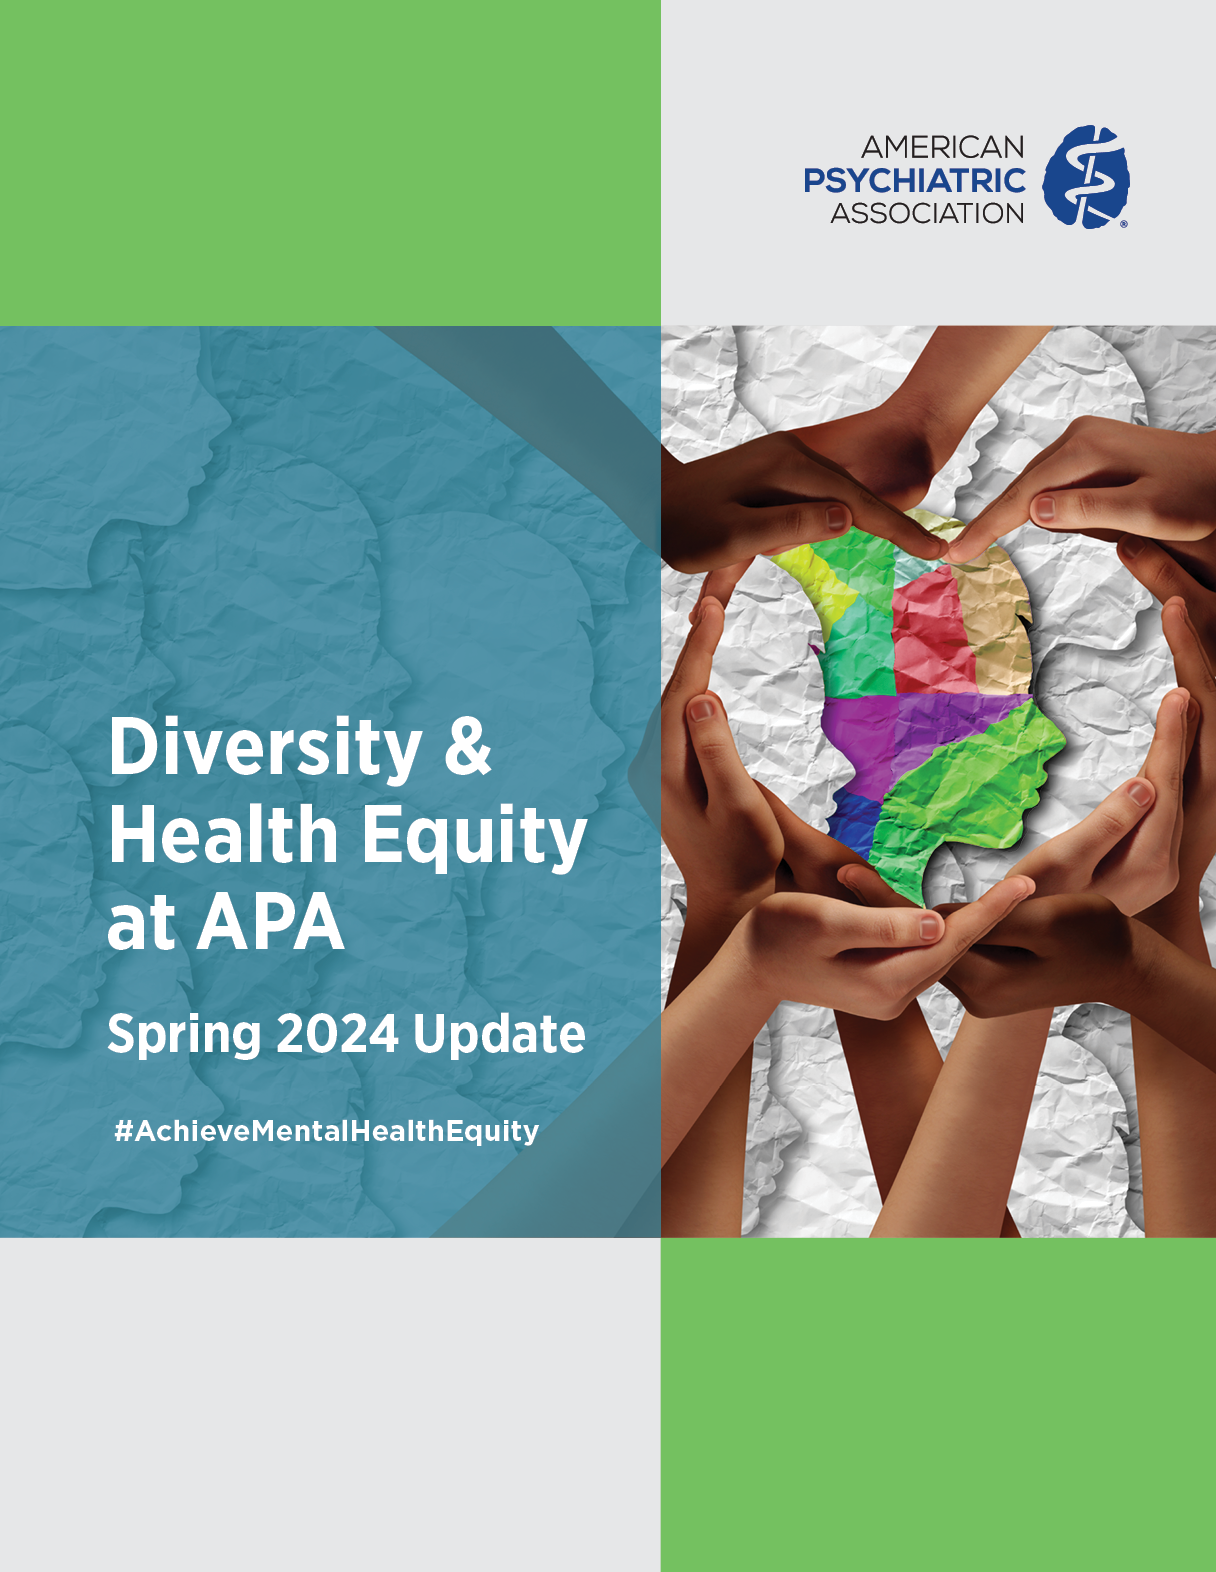 American Psychiatric Association Diversity and Health Equity at APA Spring 2024 Update #AchieveMentalHealthEquity